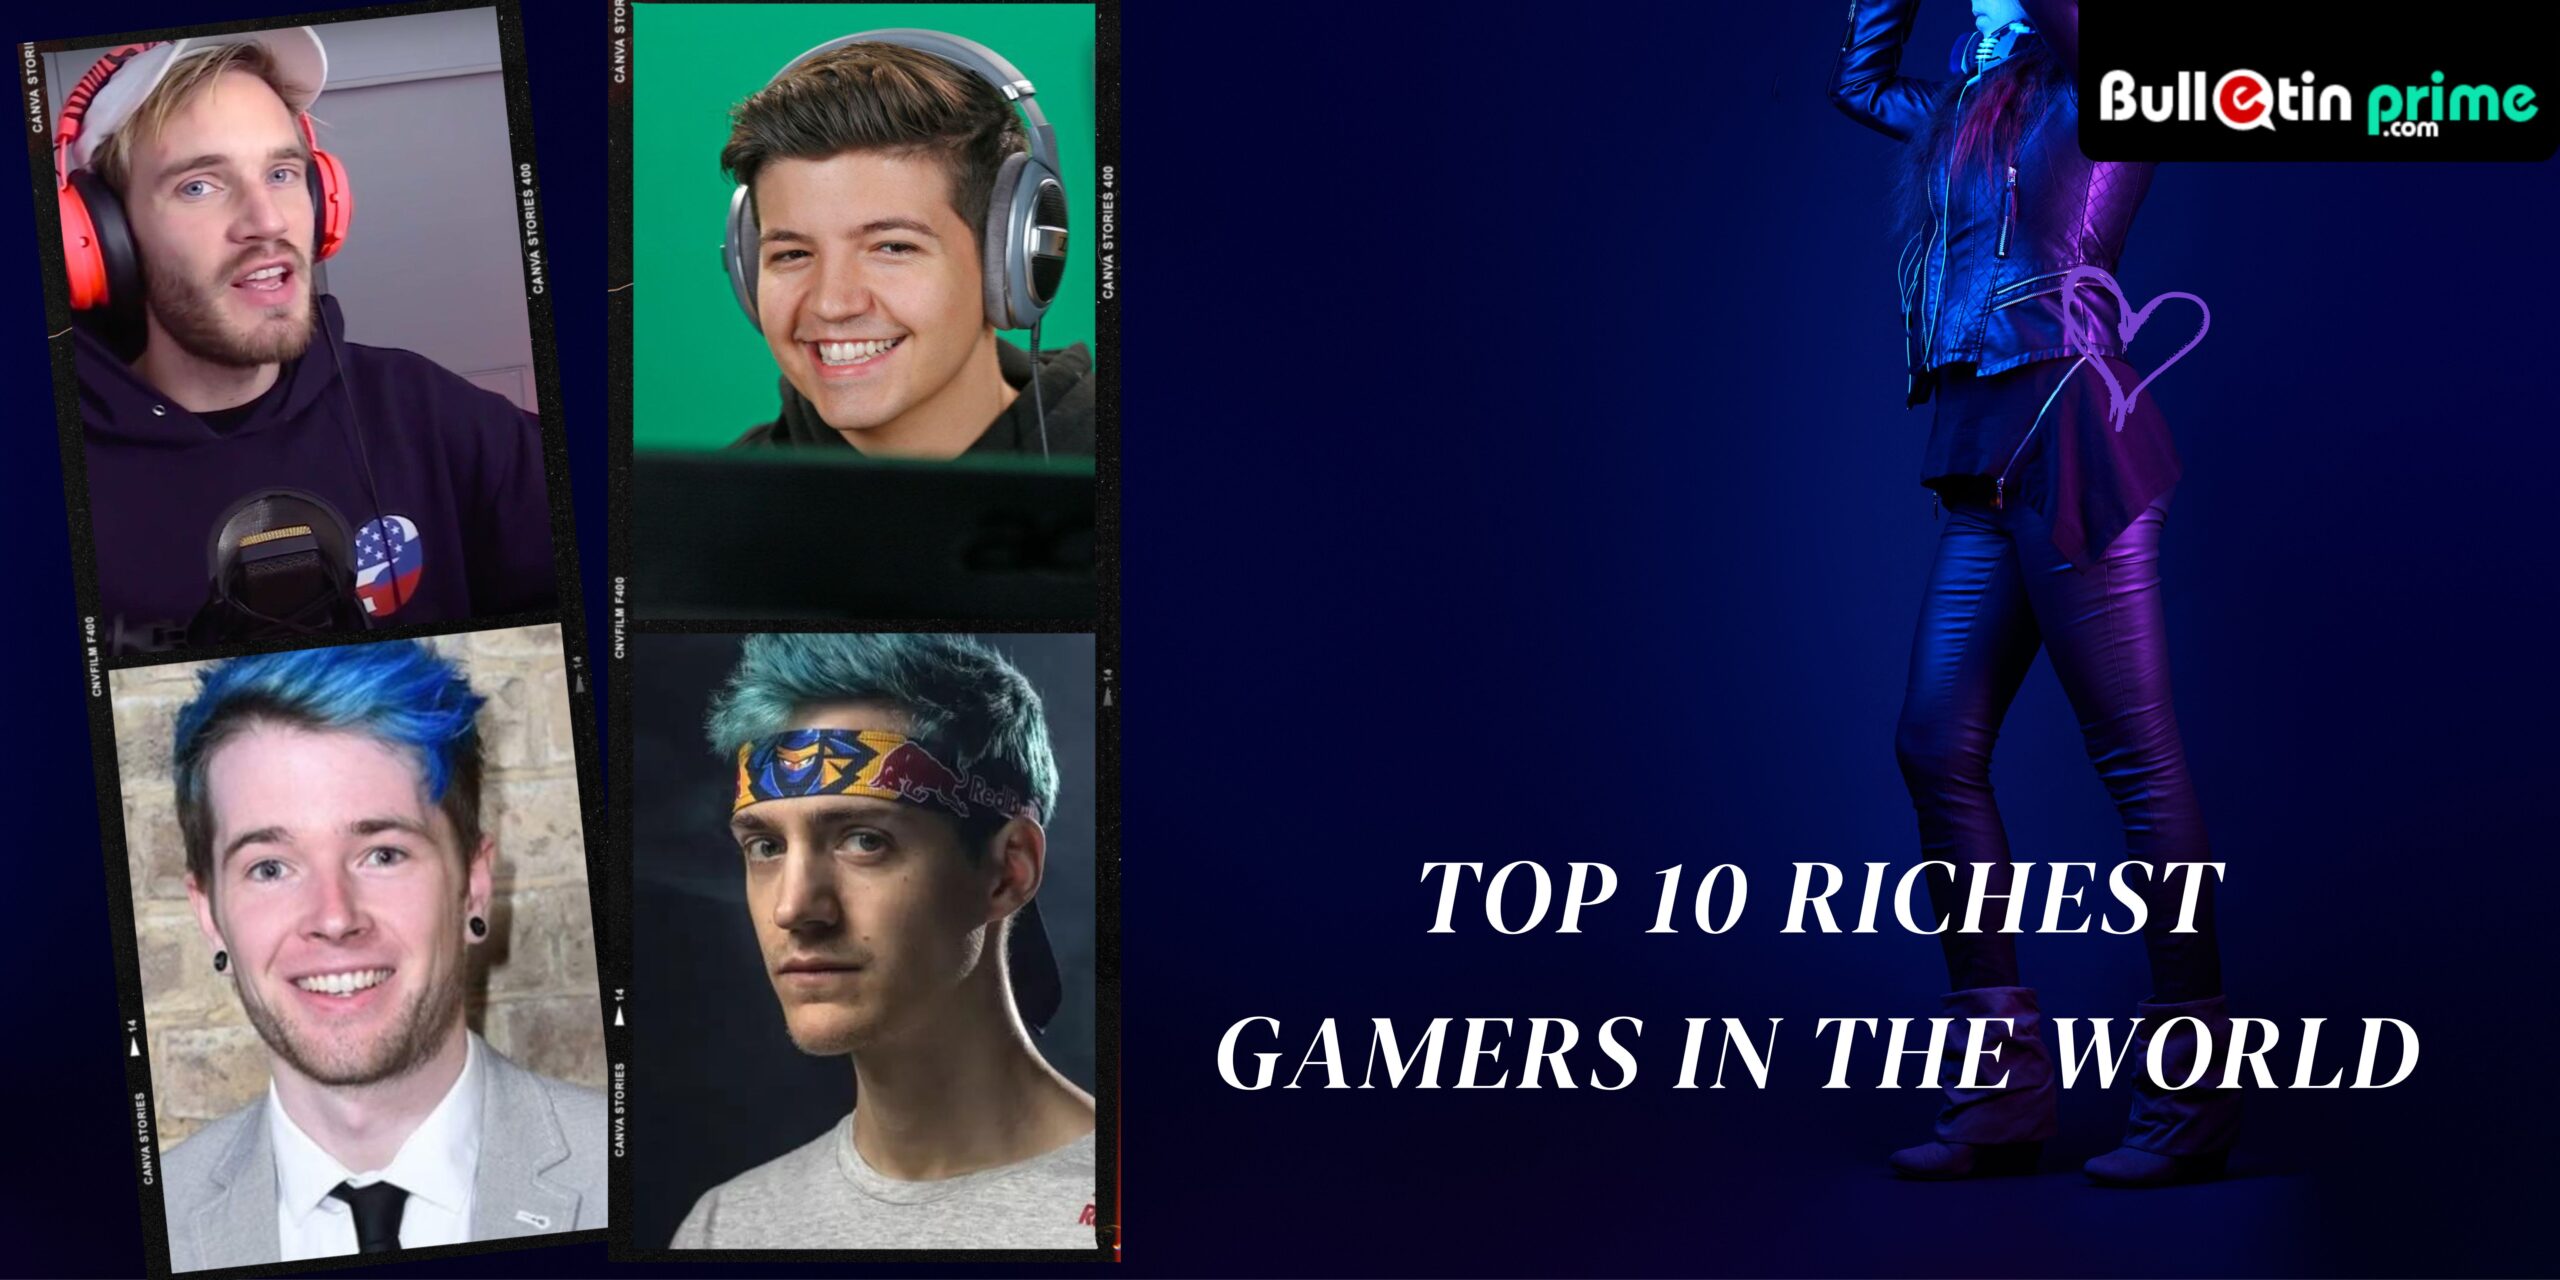 Top 10 Richest Gamers In The World